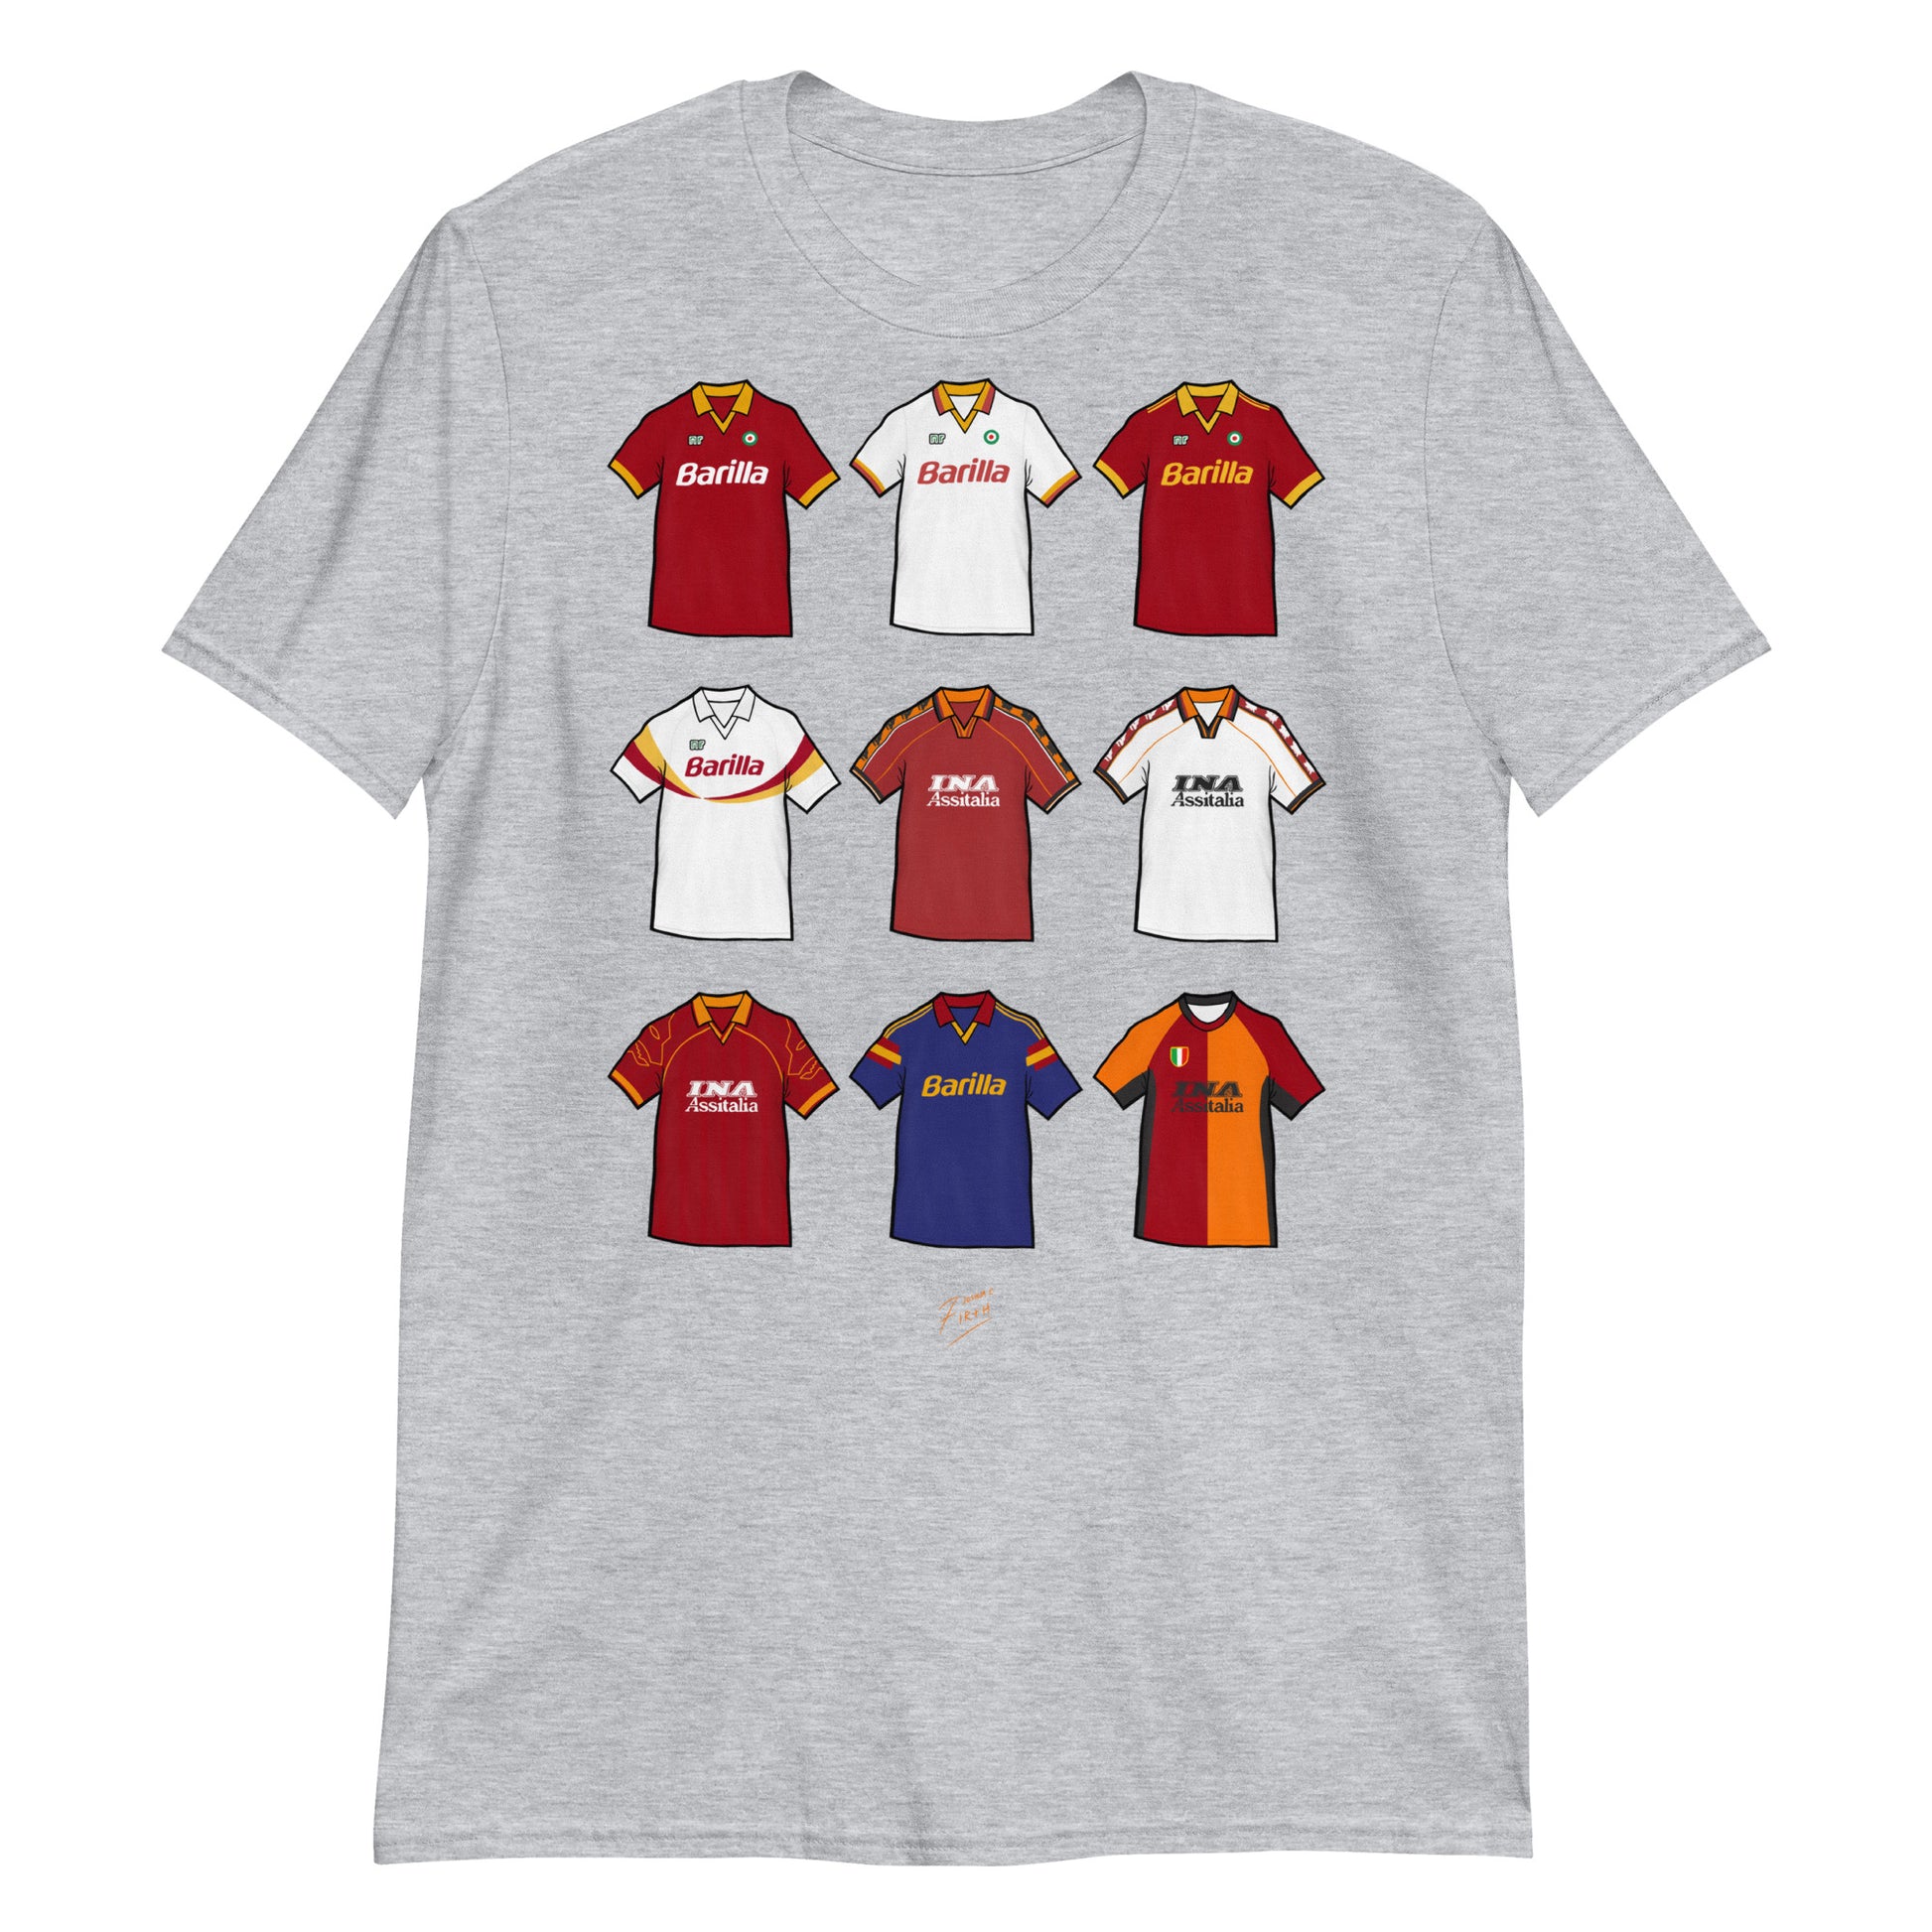 Elevate your football devotion with our AS Roma vintage retro shirt showcasing iconic artwork from 9 legendary designs. Perfect for fans looking to pay homage to the rich history of this historic football club